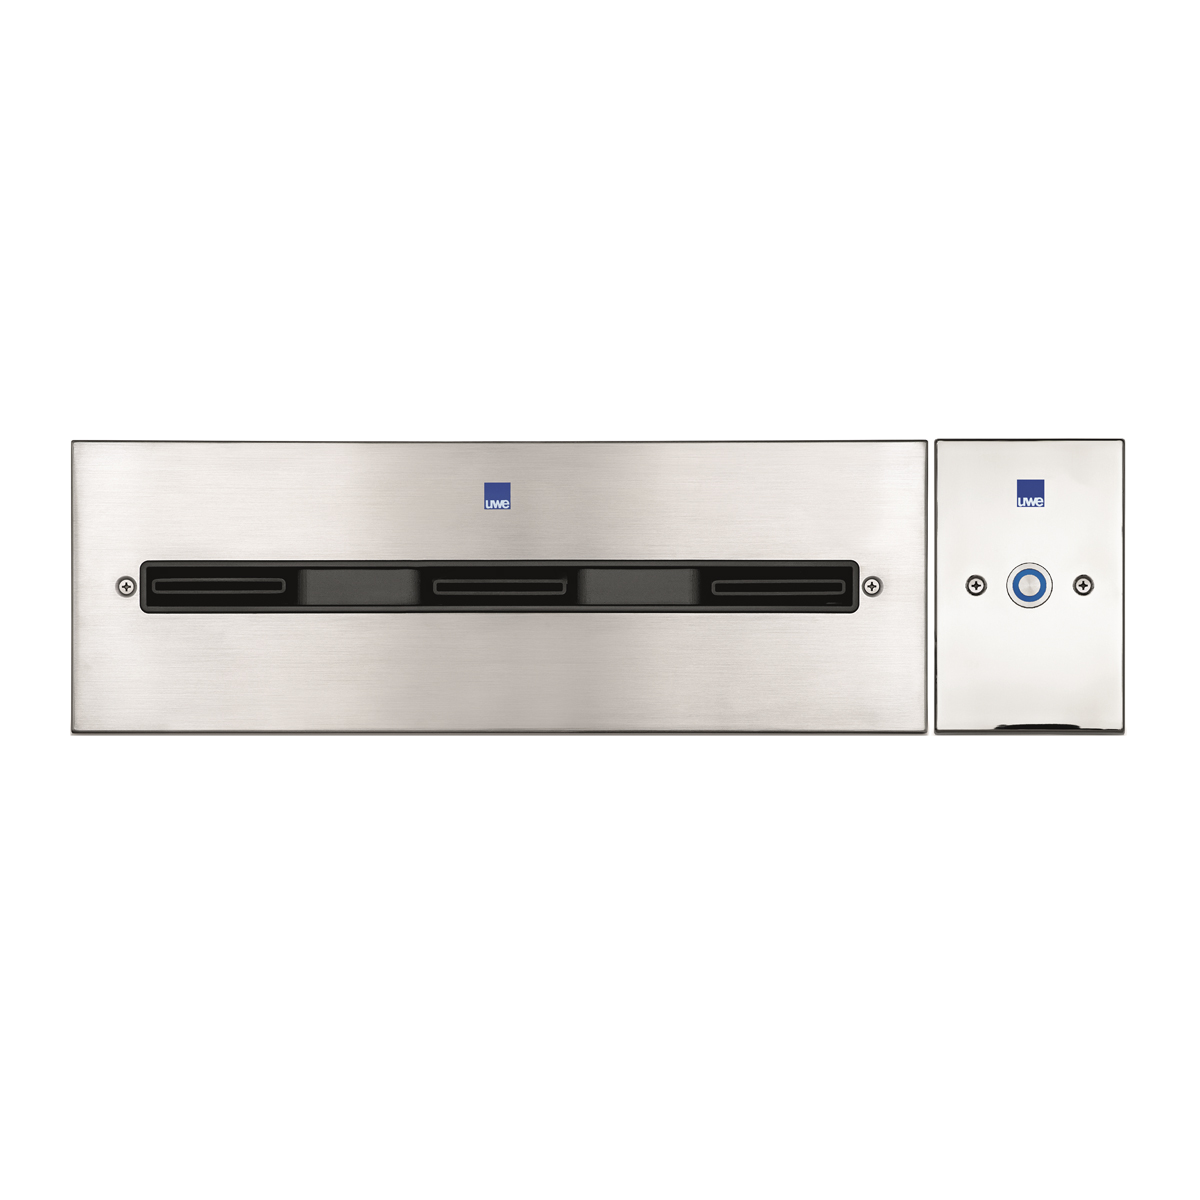 Supplementary Parts Triva 75 - front plate TriVA, Stainless steel - Piezo switch with rect. stainless steel front plate - 2x Wave 40, 285x285mm, stainless steel - 1x Pump 3~400V, 3,5 KW 2,5" - control box - accessories Supplementary Parts Triva 75 - front plate TriVA, Stainless steel - Piezo switch with rect. stainless steel front plate - 2x Wave 40, 285x285mm, stainless steel - 1x Pump 3~400V, 3,5 KW 2,5" - control box - accessories